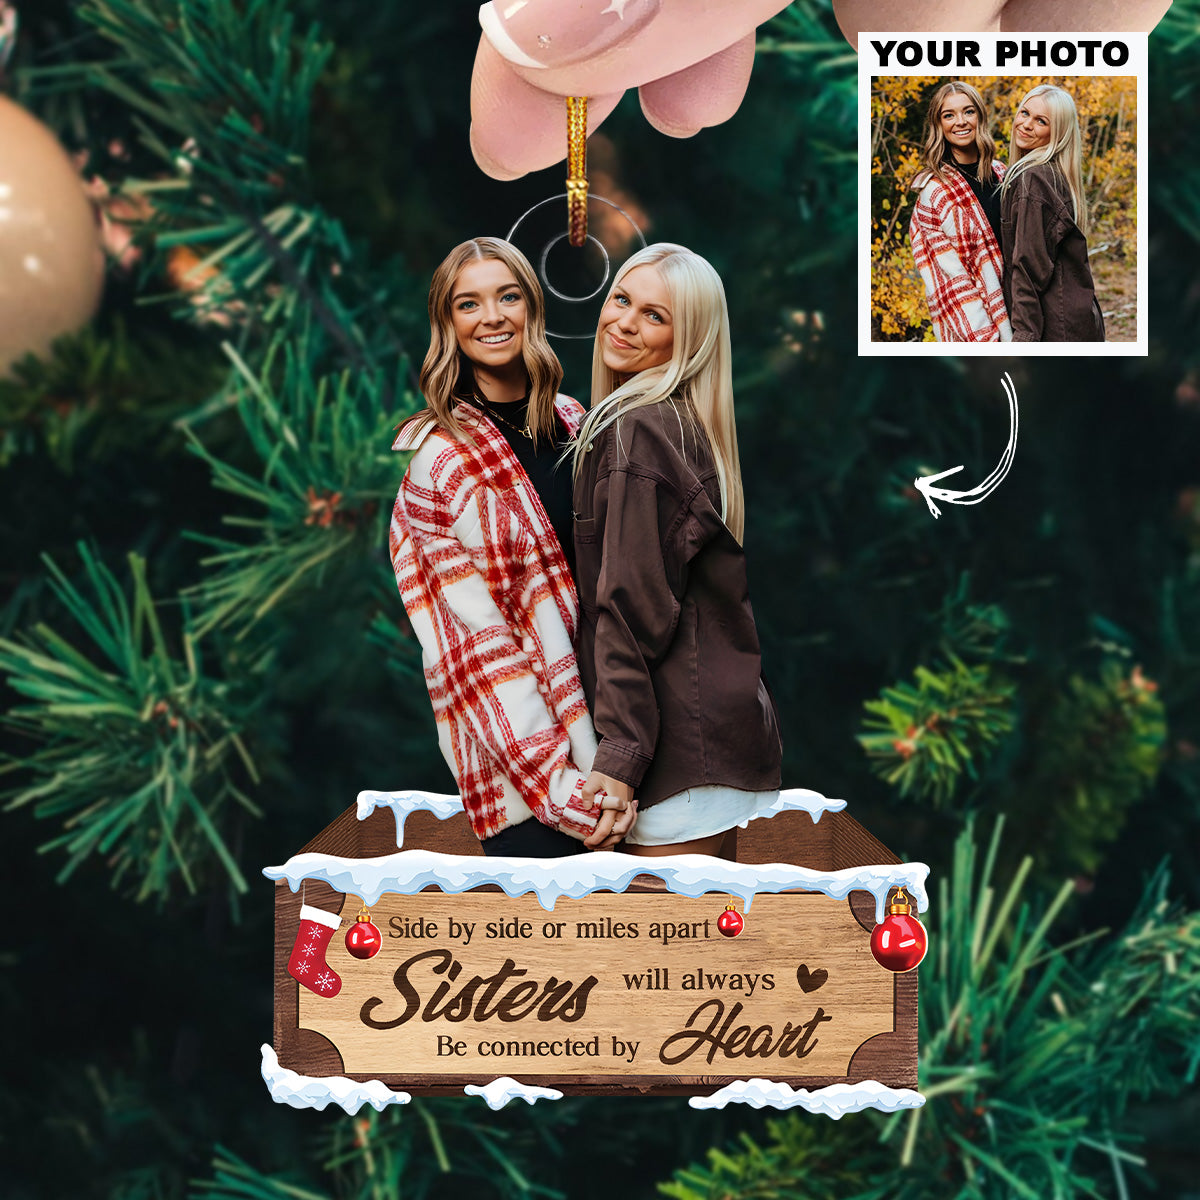 Side By Side Or Miles Apart, Sisters Will Always Connected By Heart - Personalized Photo Mica Ornament - Christmas Gift For Sisters UPL0HD035